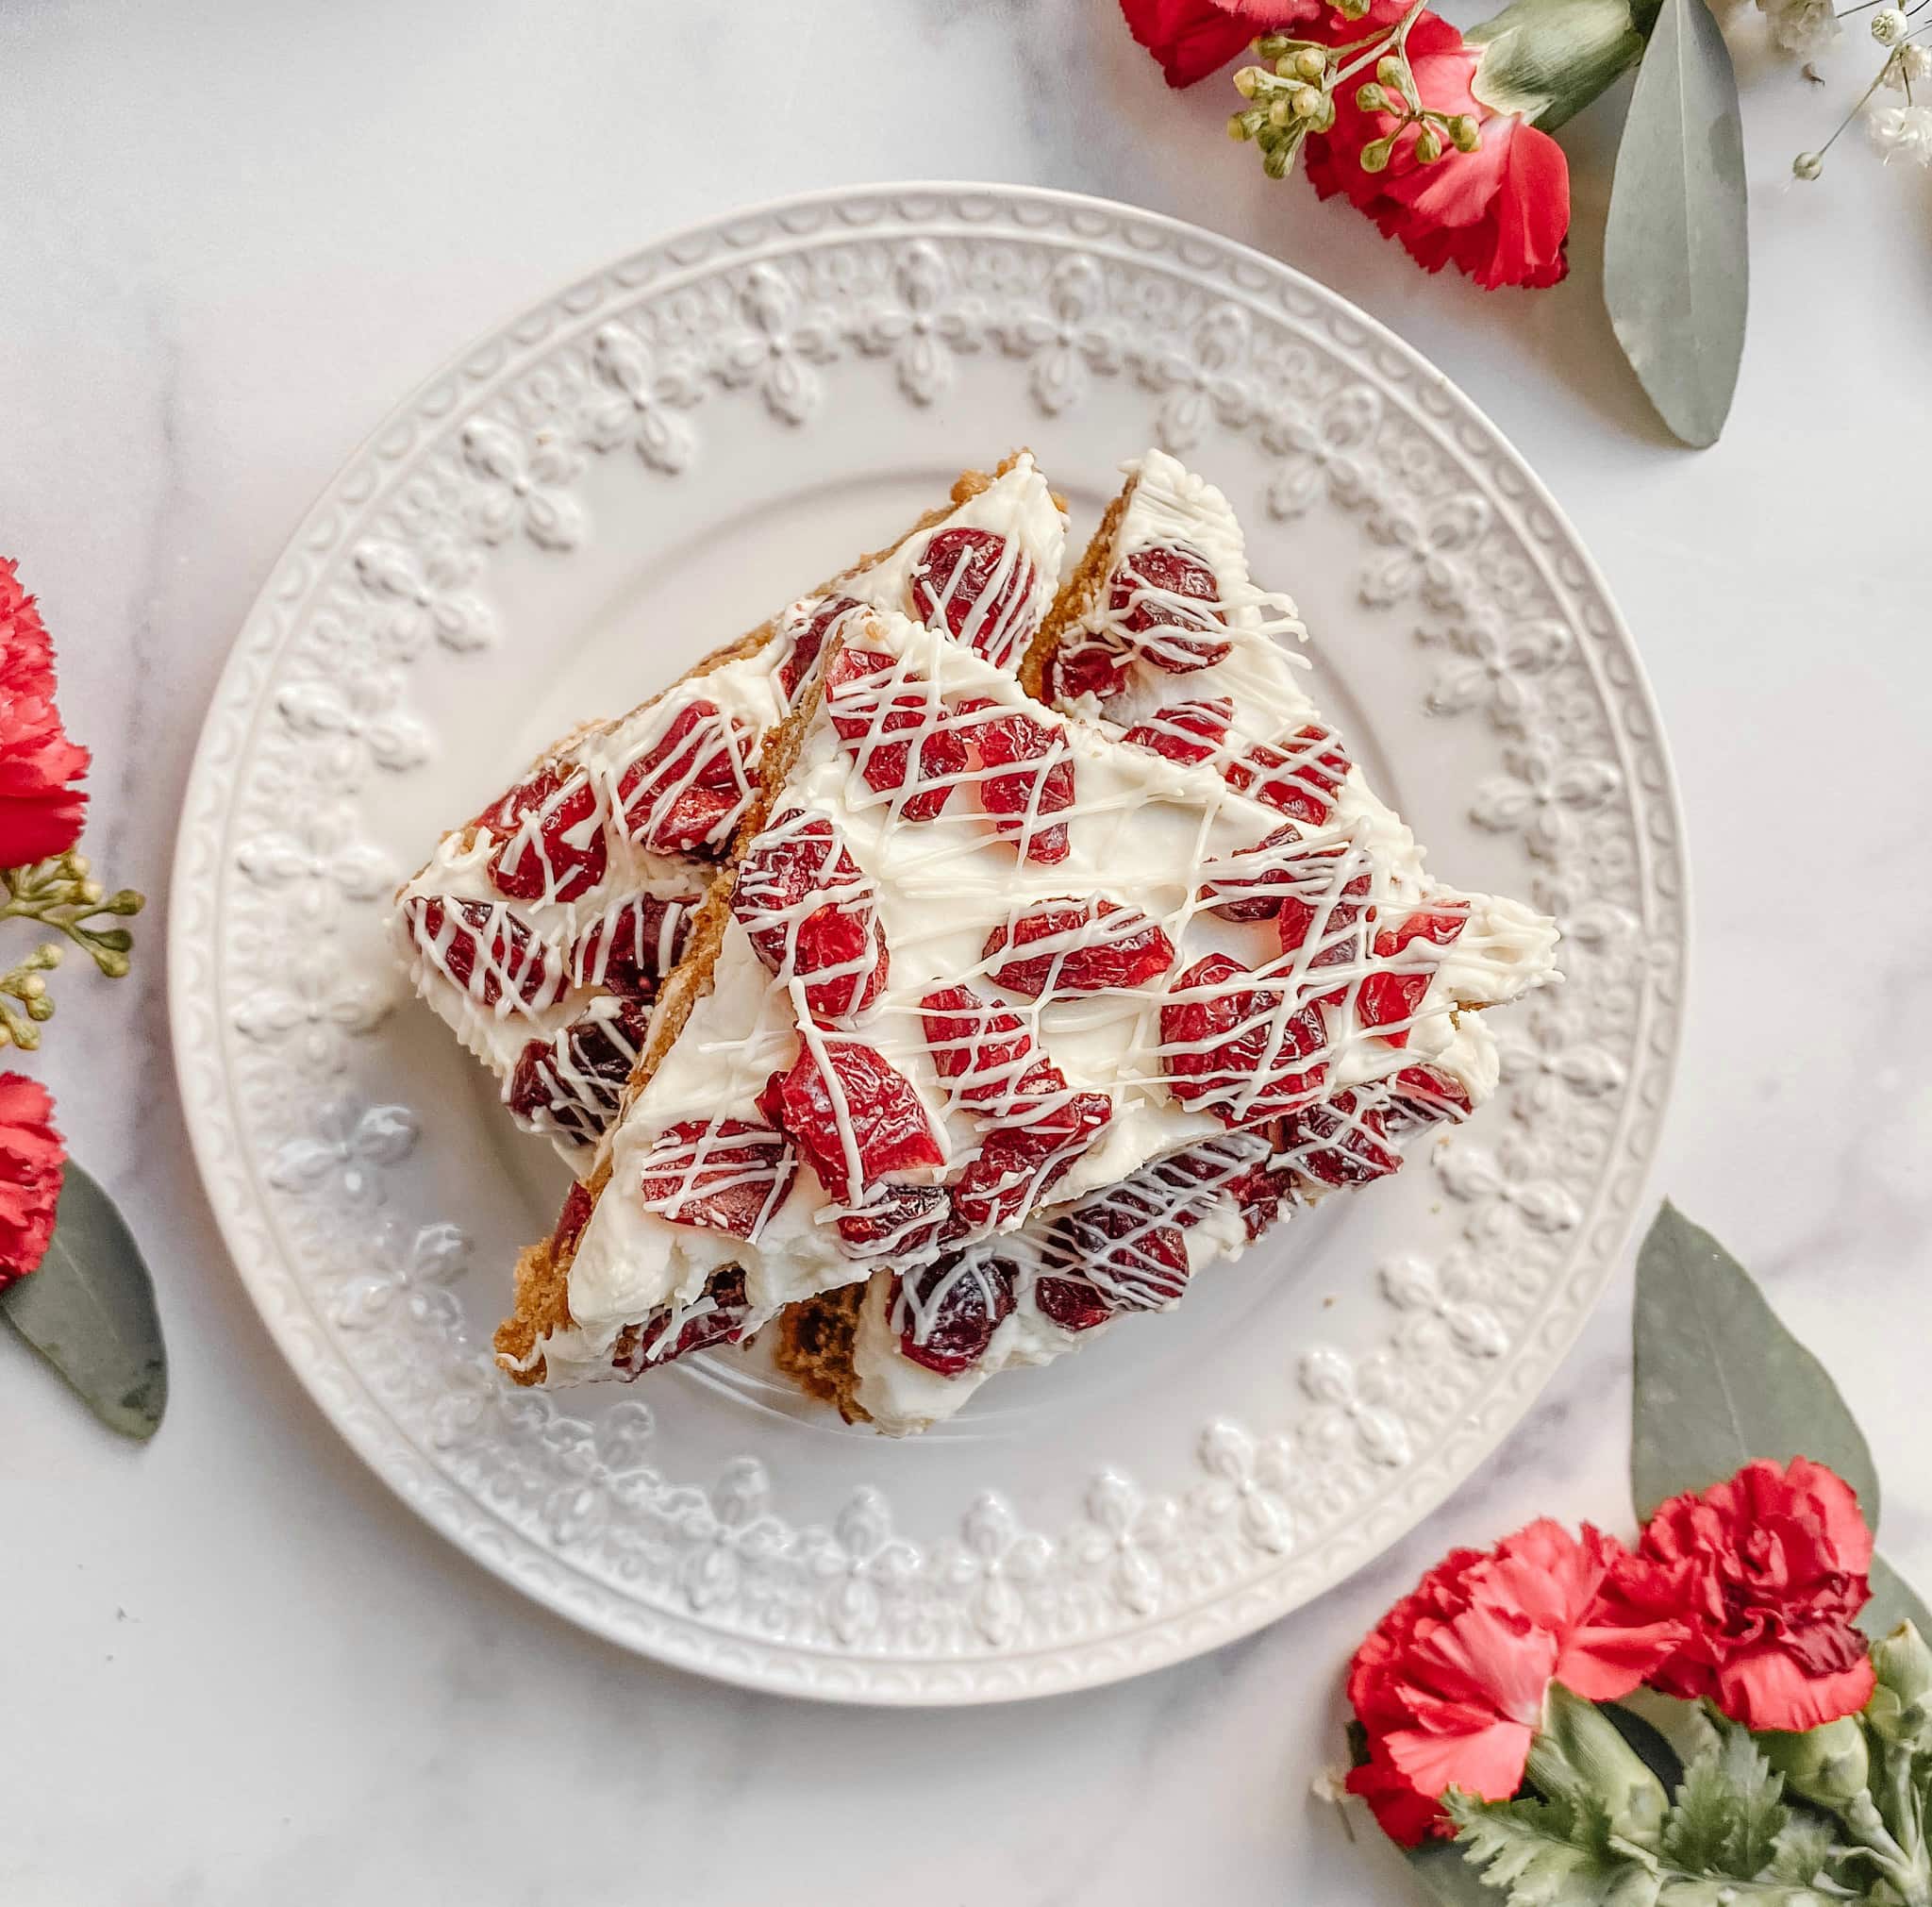 A stack of cranberry bliss bars on a decorative ceramic plate.